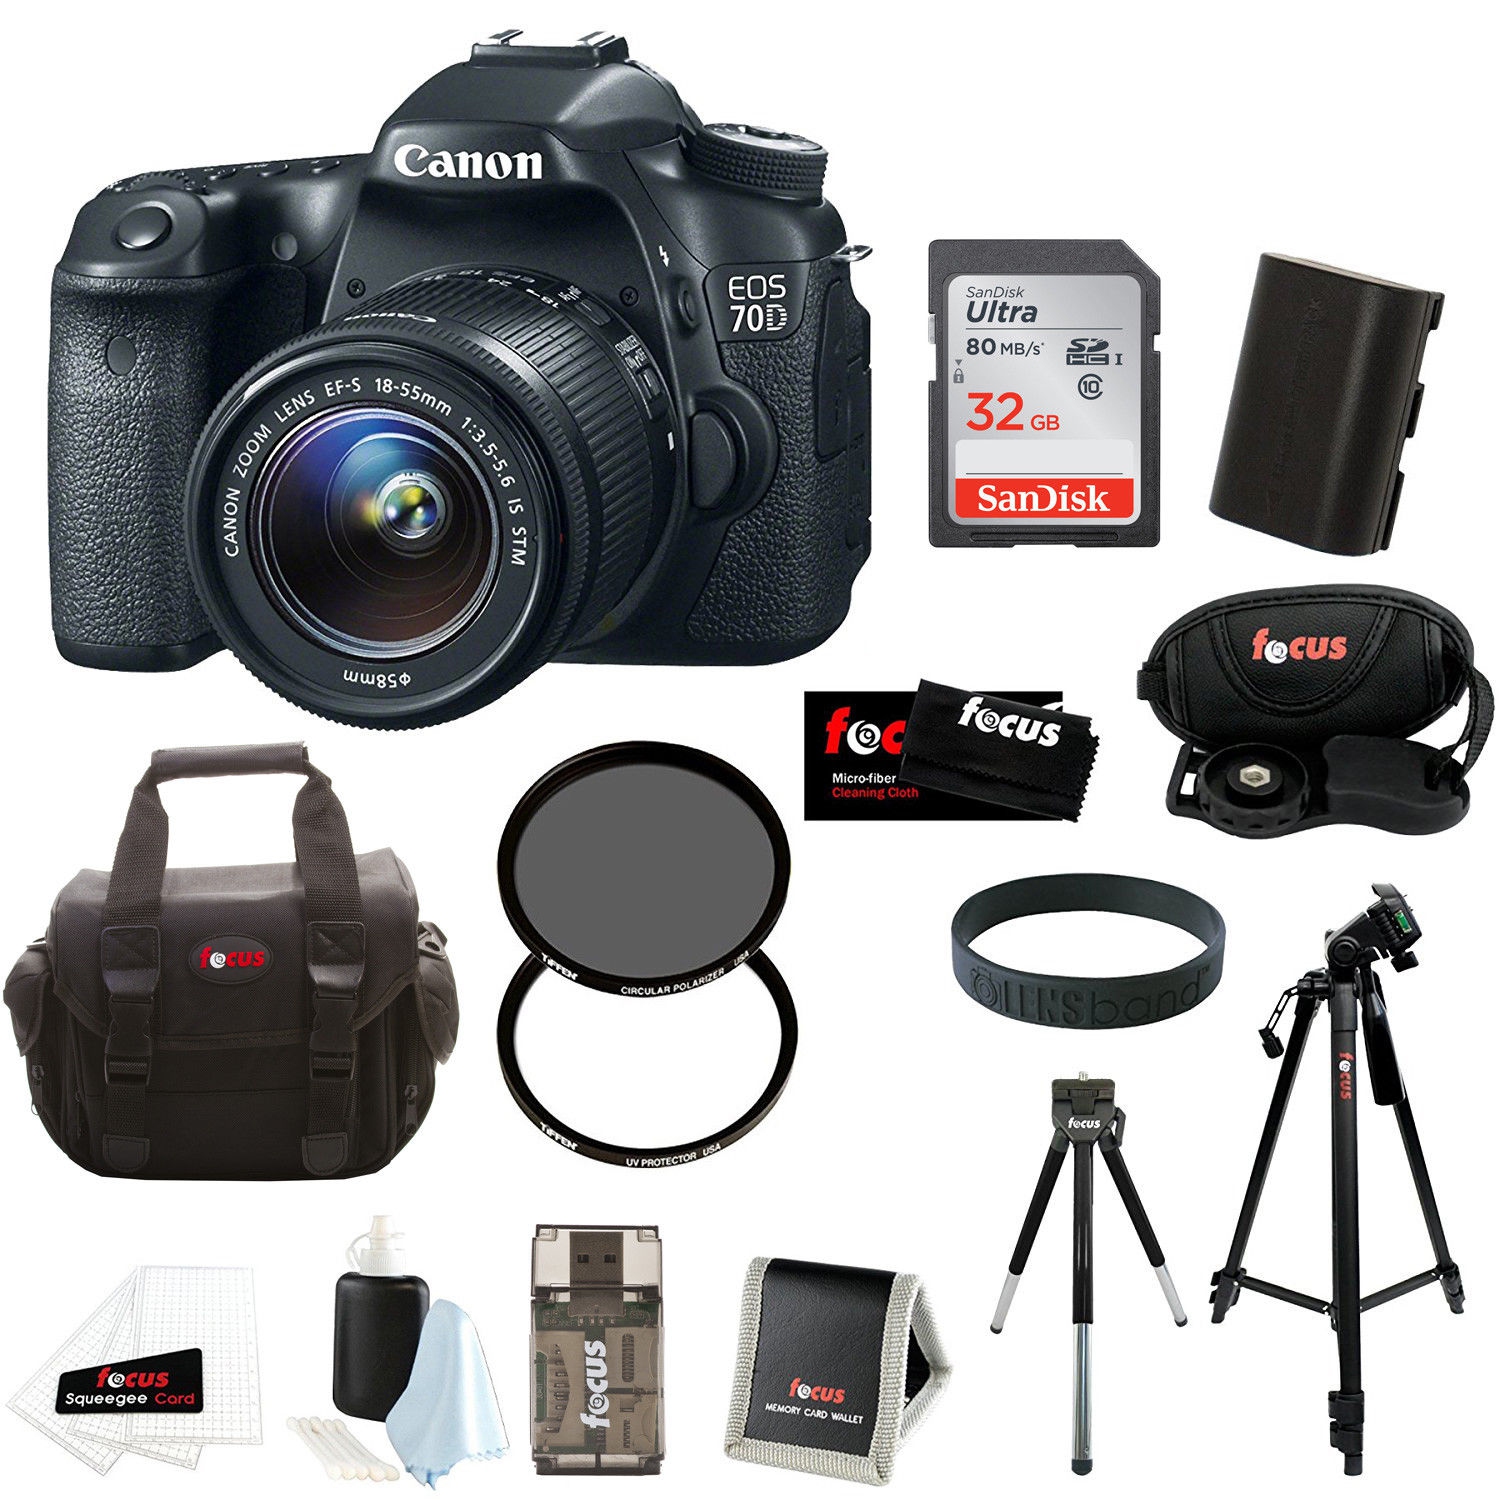 Canon EOS 70D DSLR Camera with 18-55mm IS STM Lens and 32GB Accessory Bundle - US Version w/ Seller Warranty